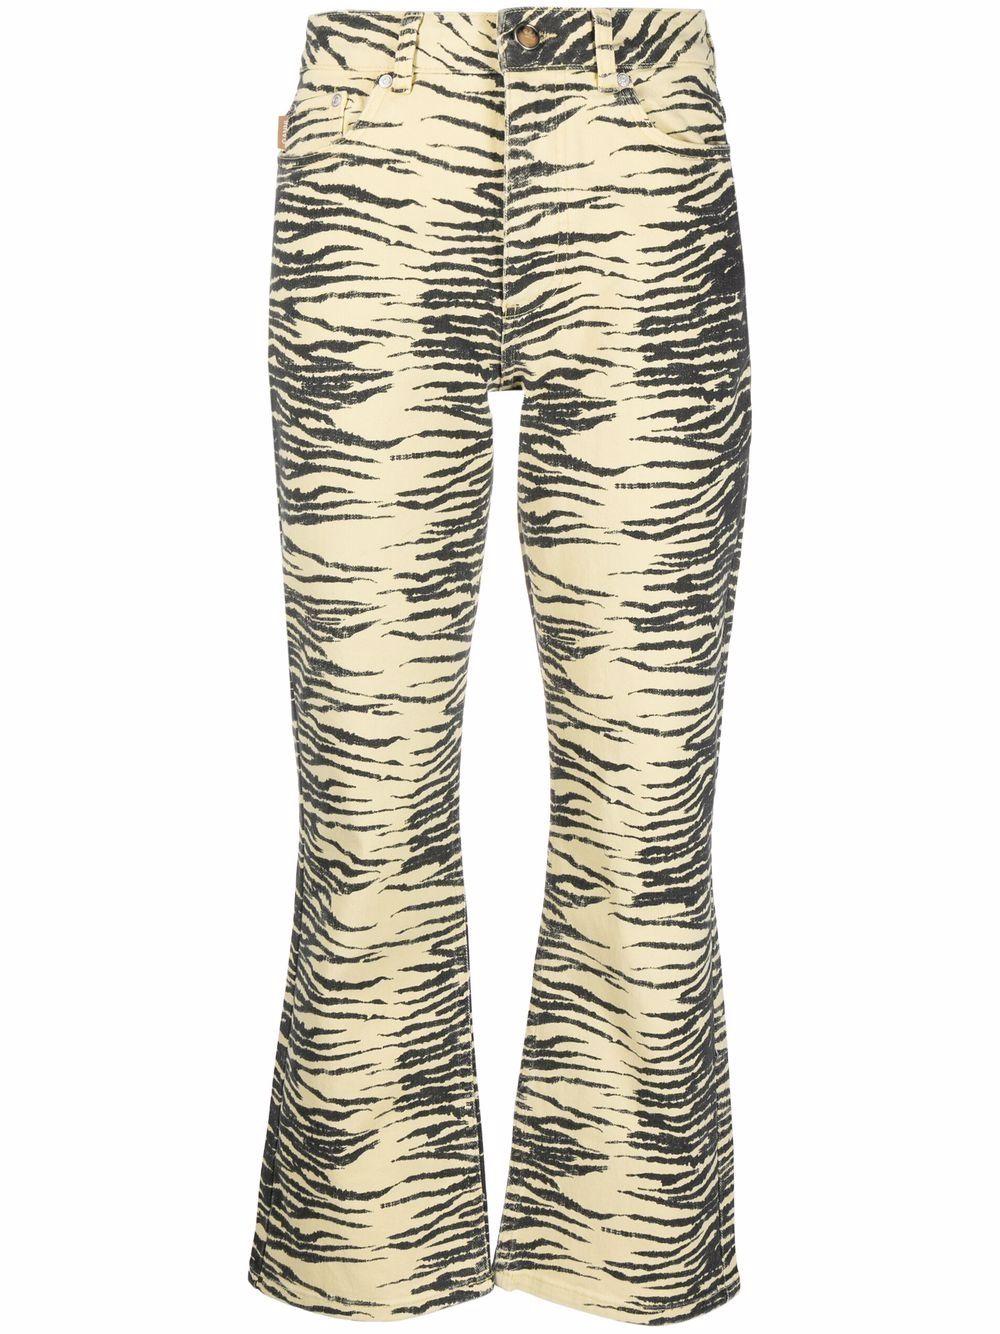 Ganni Denim Tiger-print Cropped Jeans in Yellow - Lyst